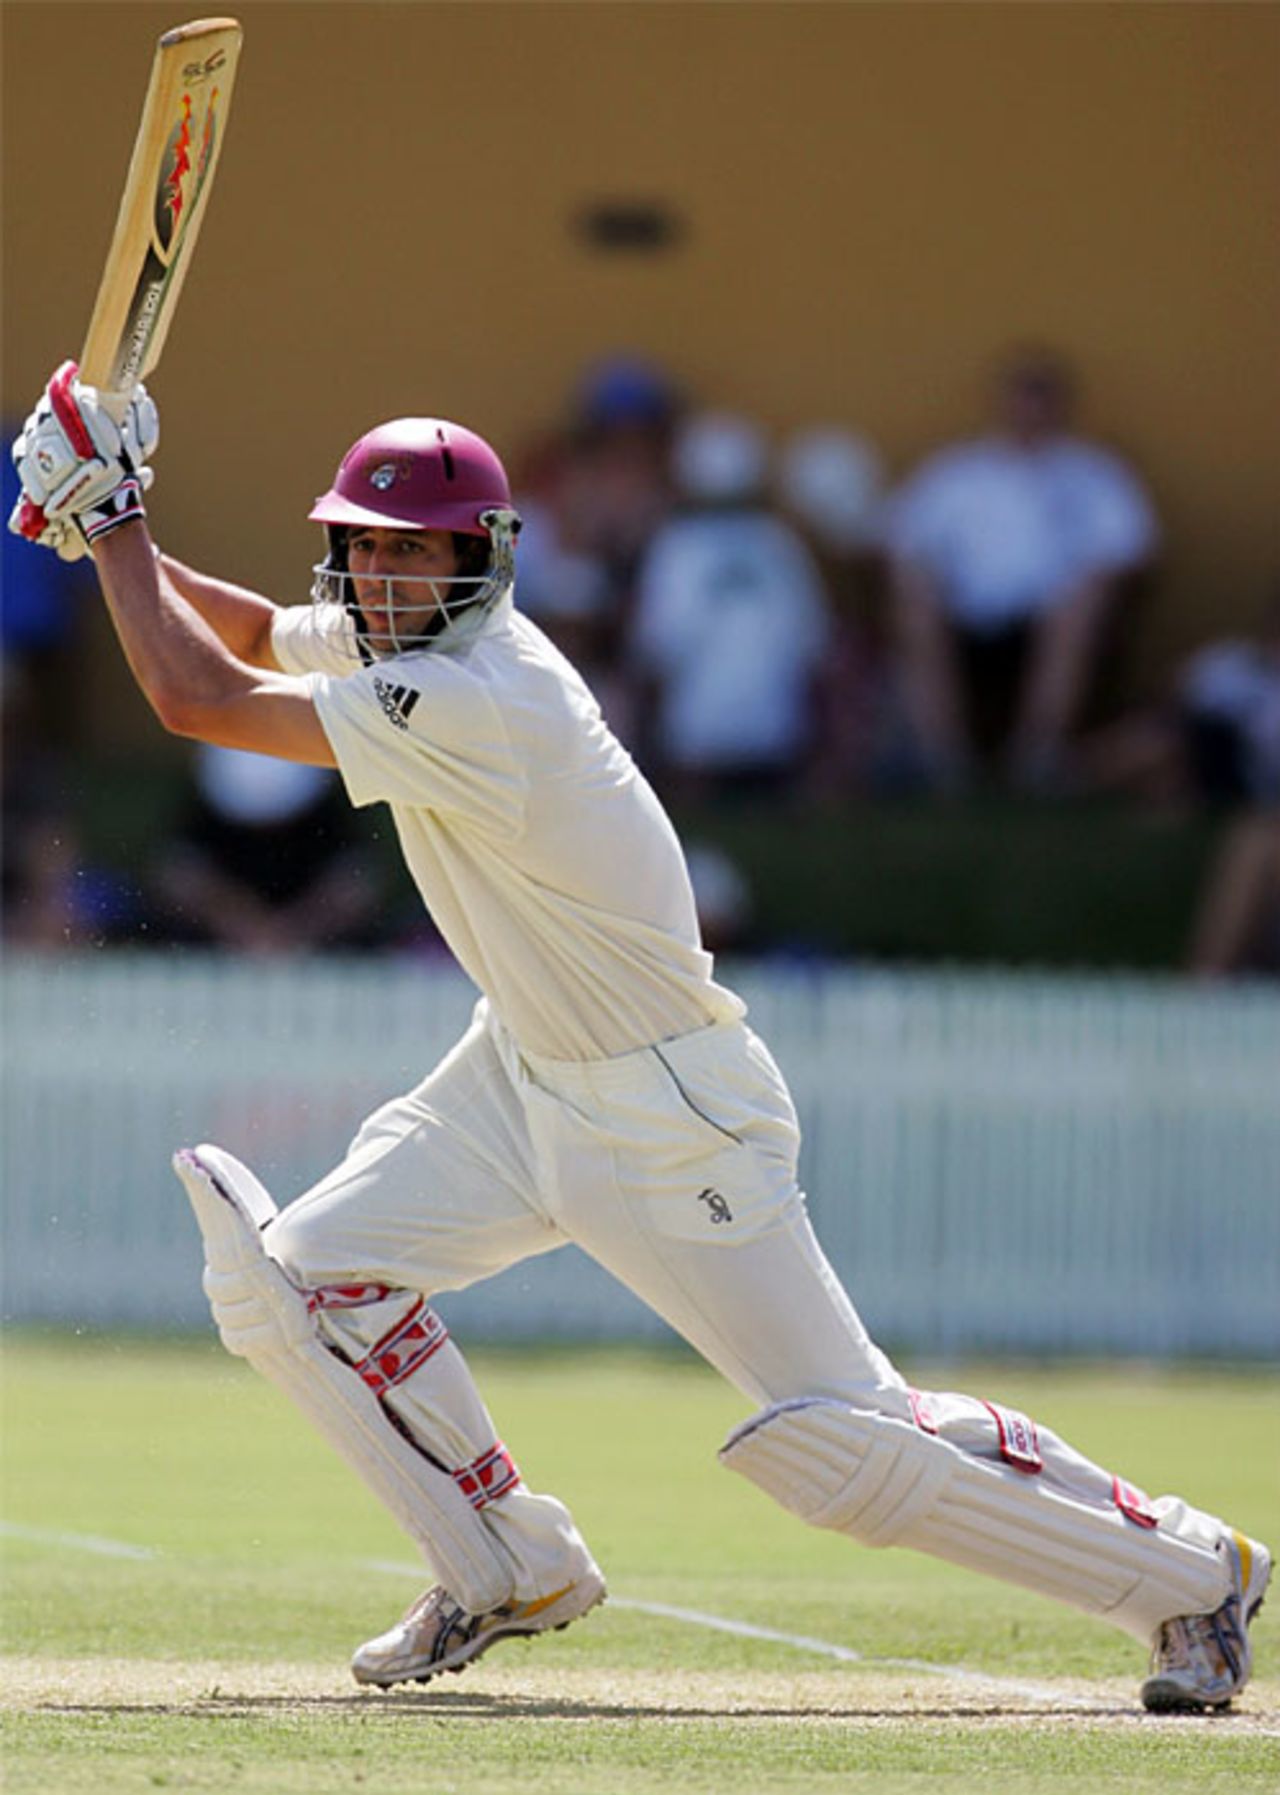 Mitchell Johnson made his fourth first-class fifty, Queensland v Sri Lankans, 2nd day, Brisbane, November 3, 2007